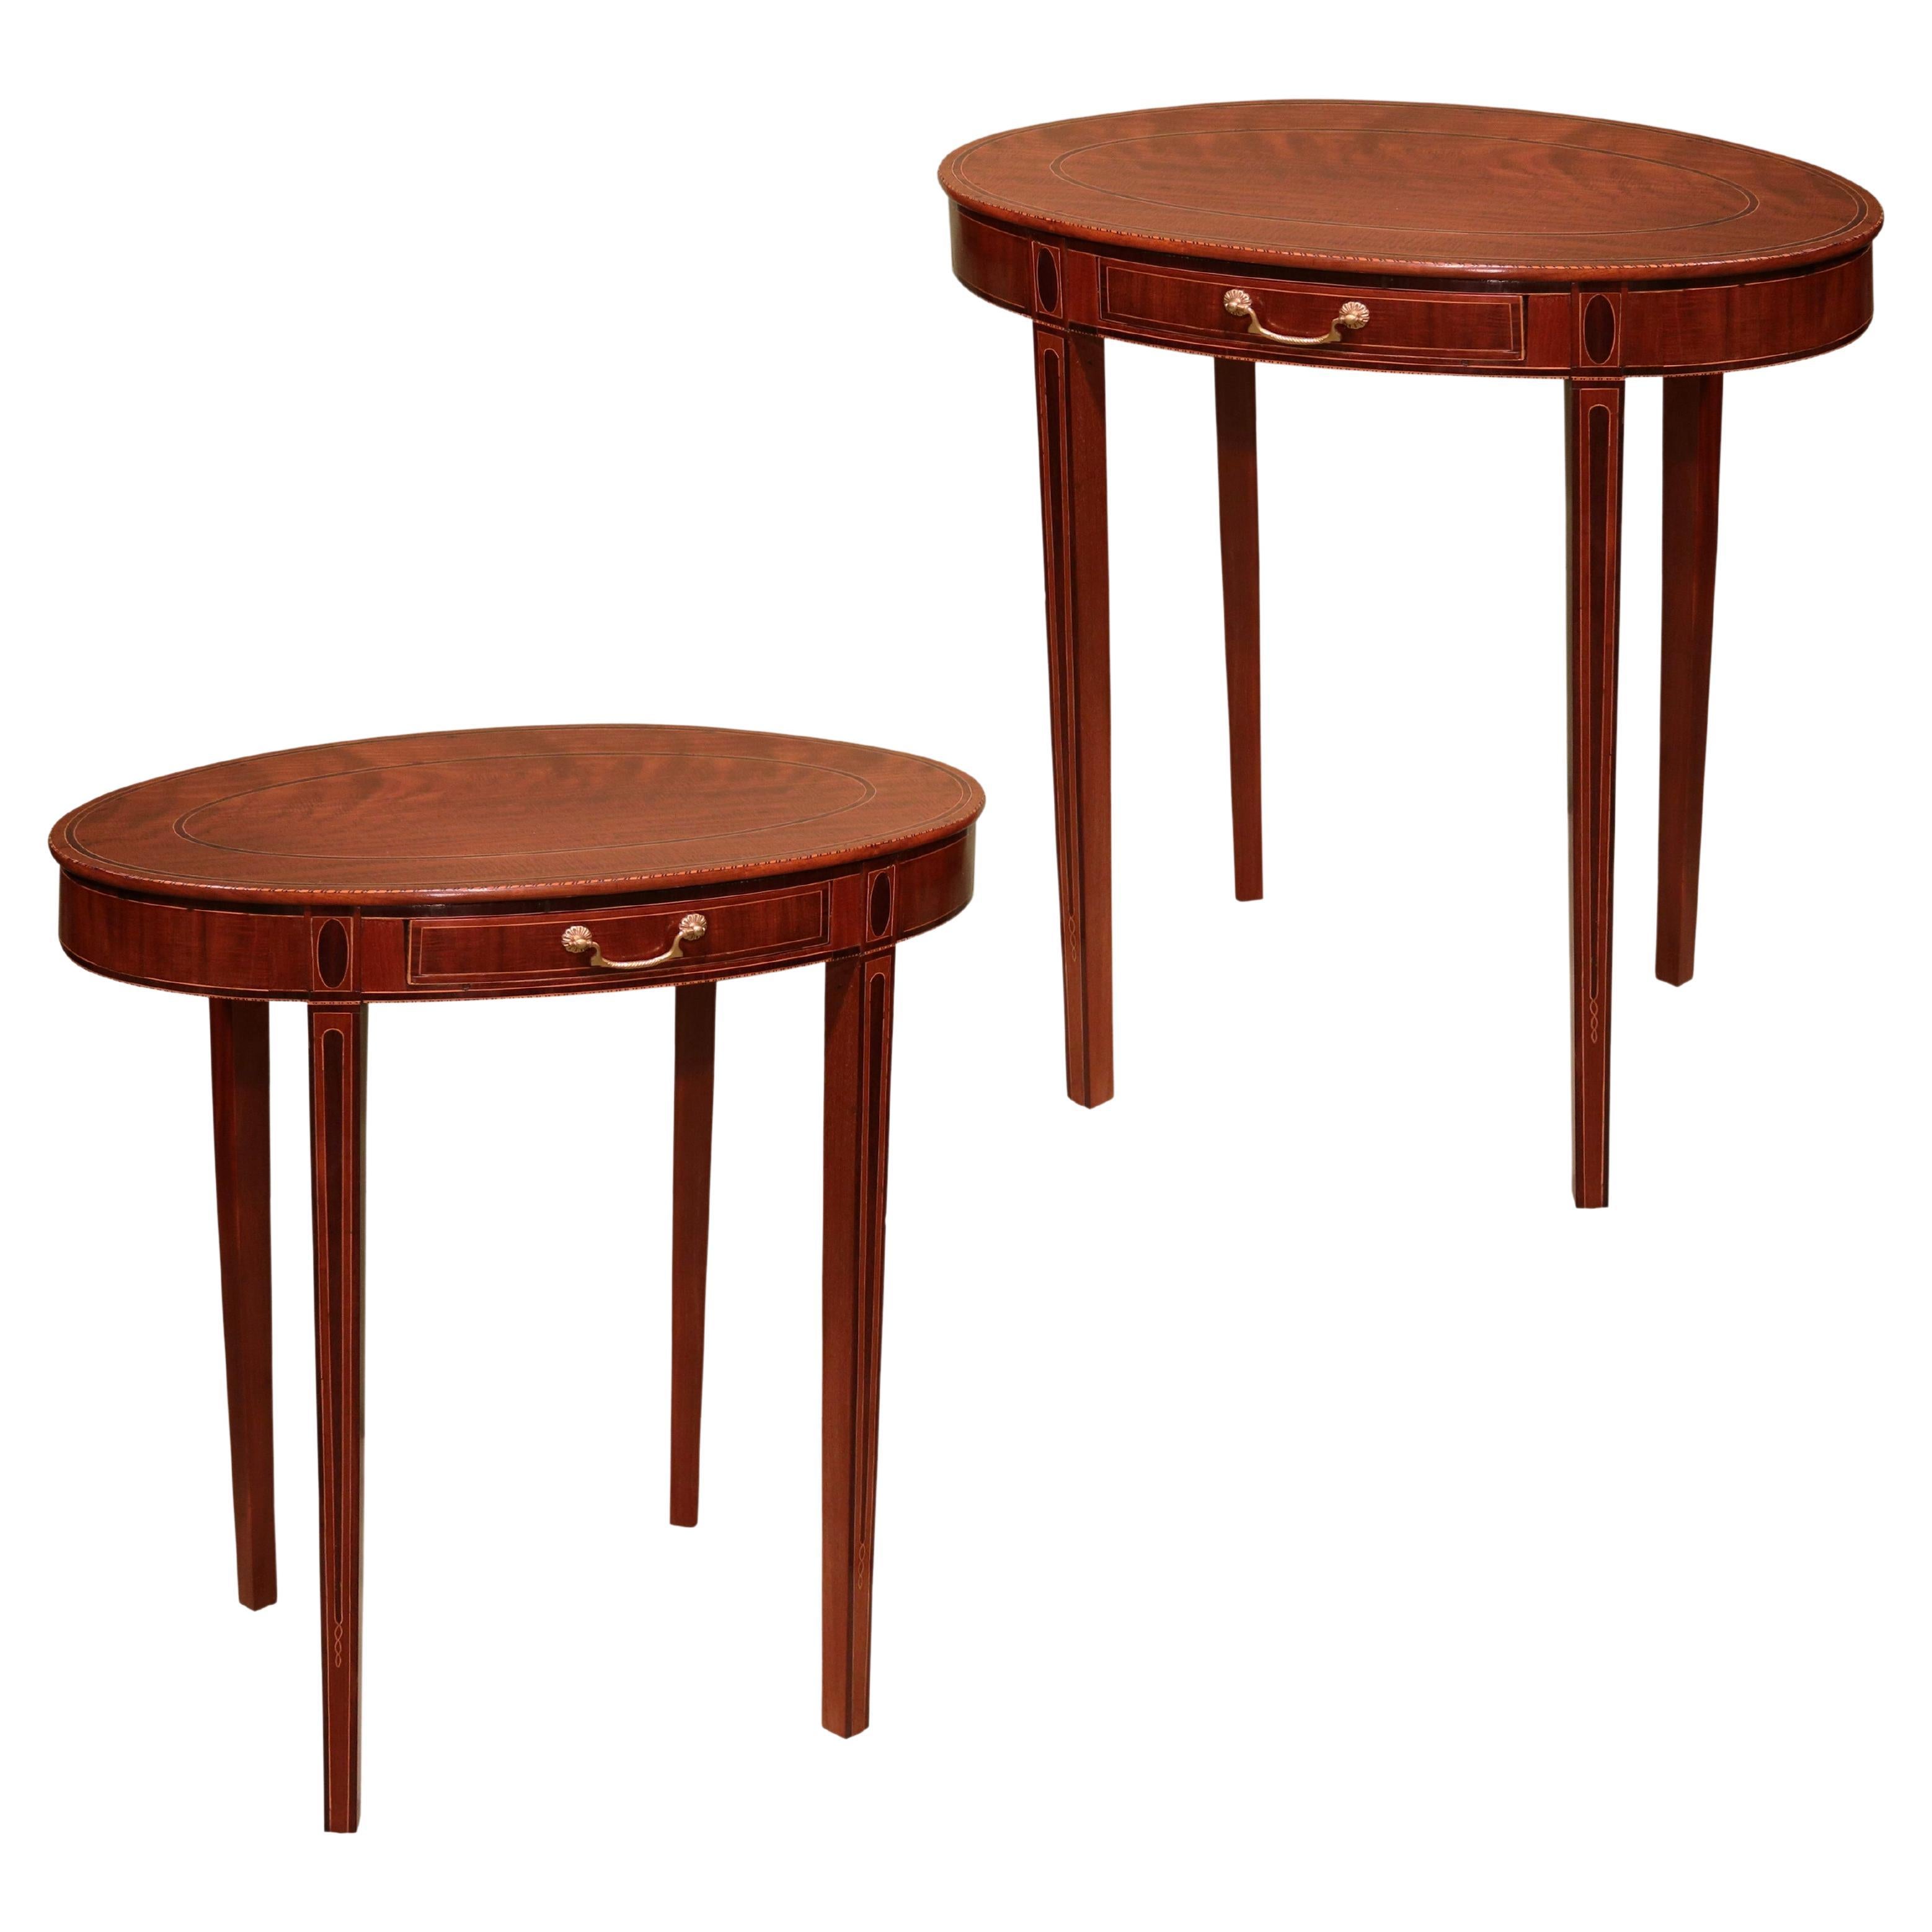 A pair of late 18th century Sheraton period mahogany oval occasional tables